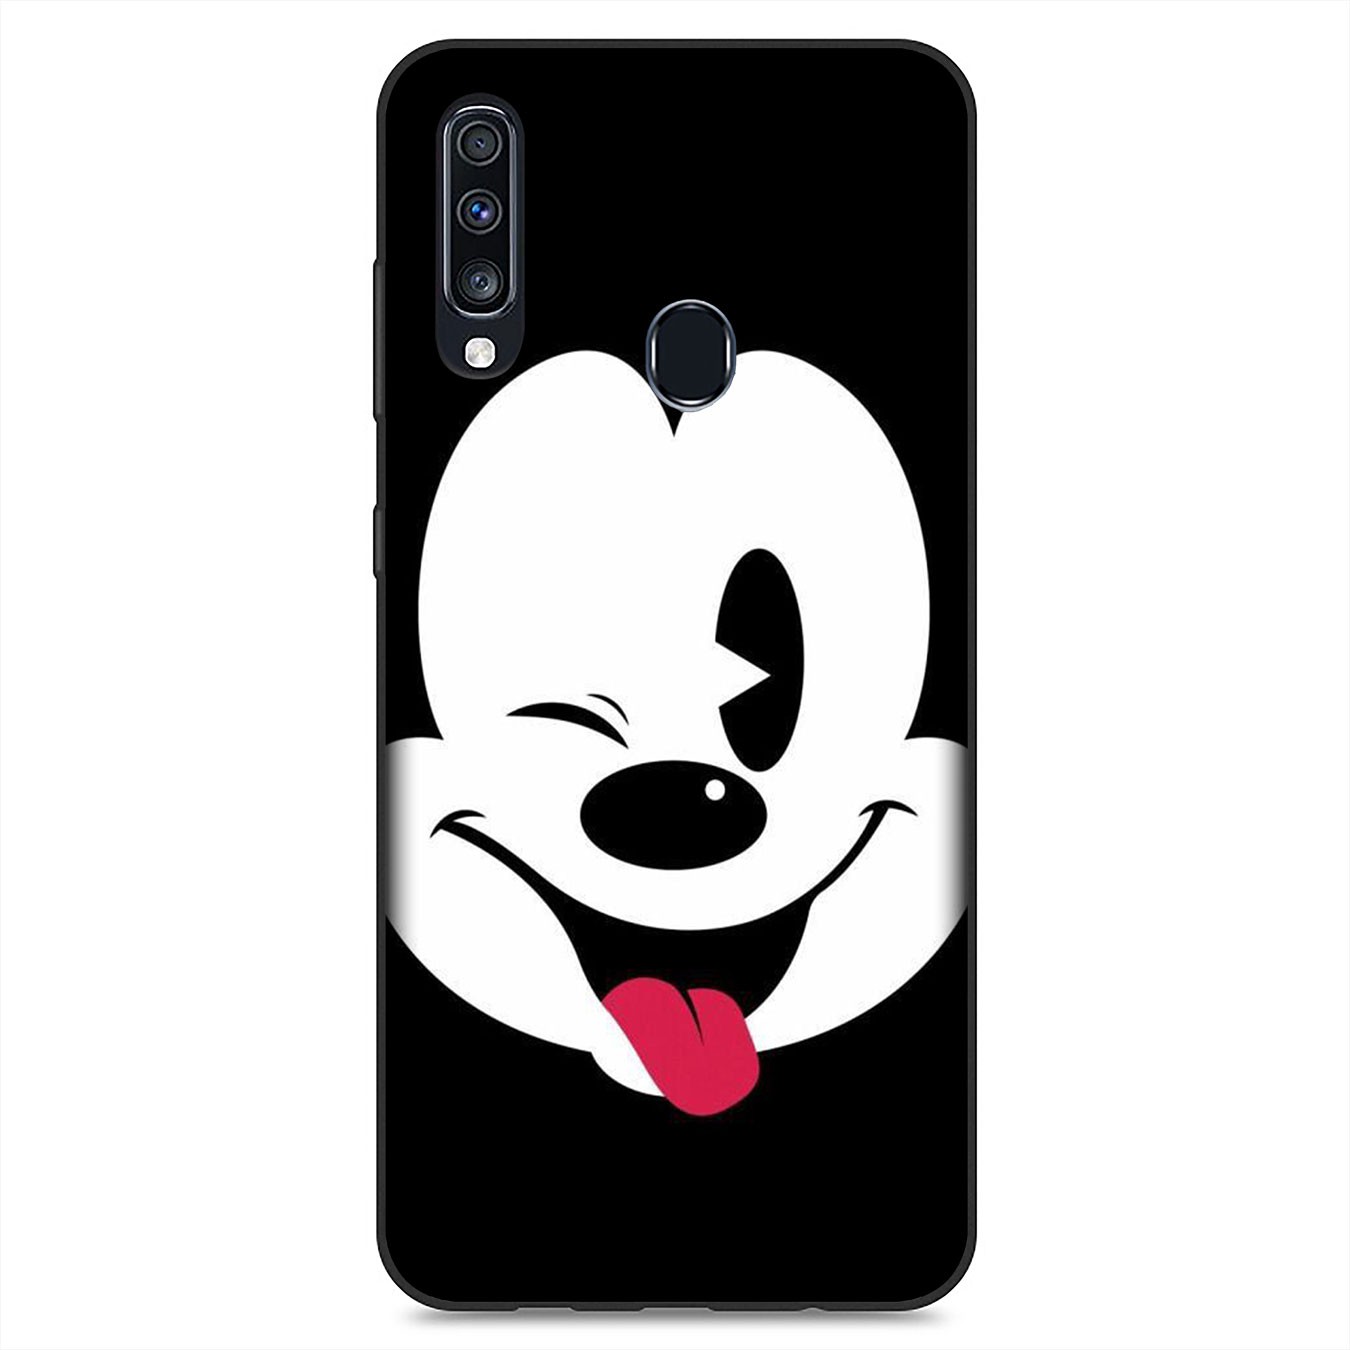 Samsung Galaxy S9 S10 S20 FE Ultra Plus Lite S20+ S9+ S10+ S20Plus Casing Soft Silicone Phone Case Cartoon Mickey Mouse Cover